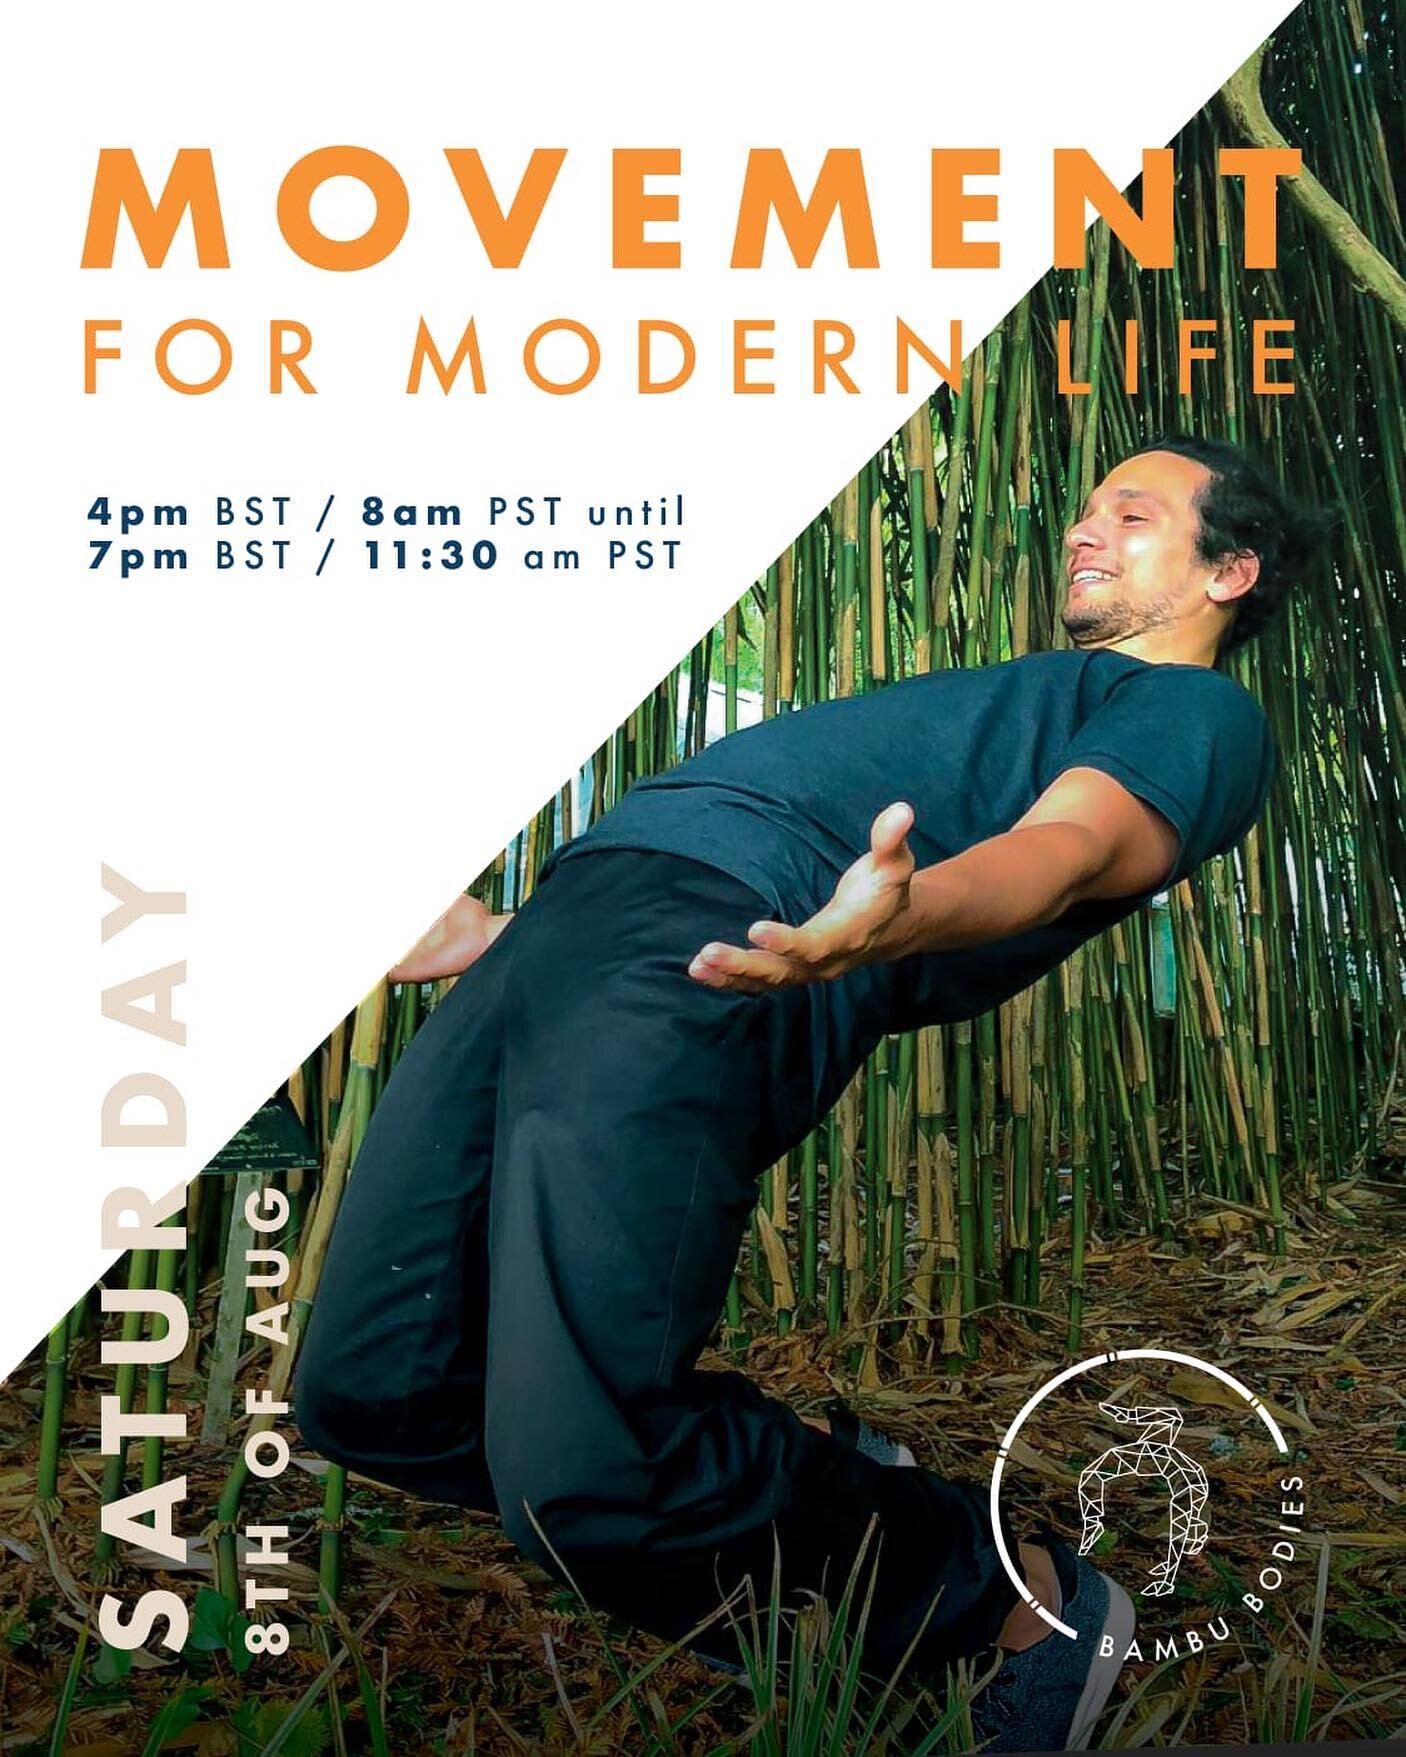 Movement for Modern life !

The first of a online mini workshop series with guest practitioners sharing and exploring ideas and movement modalities to benefit your practice and lifestyle 
_
Let&rsquo;s move !
_
Starting Saturday 8th of Aug 
_
4pm BST